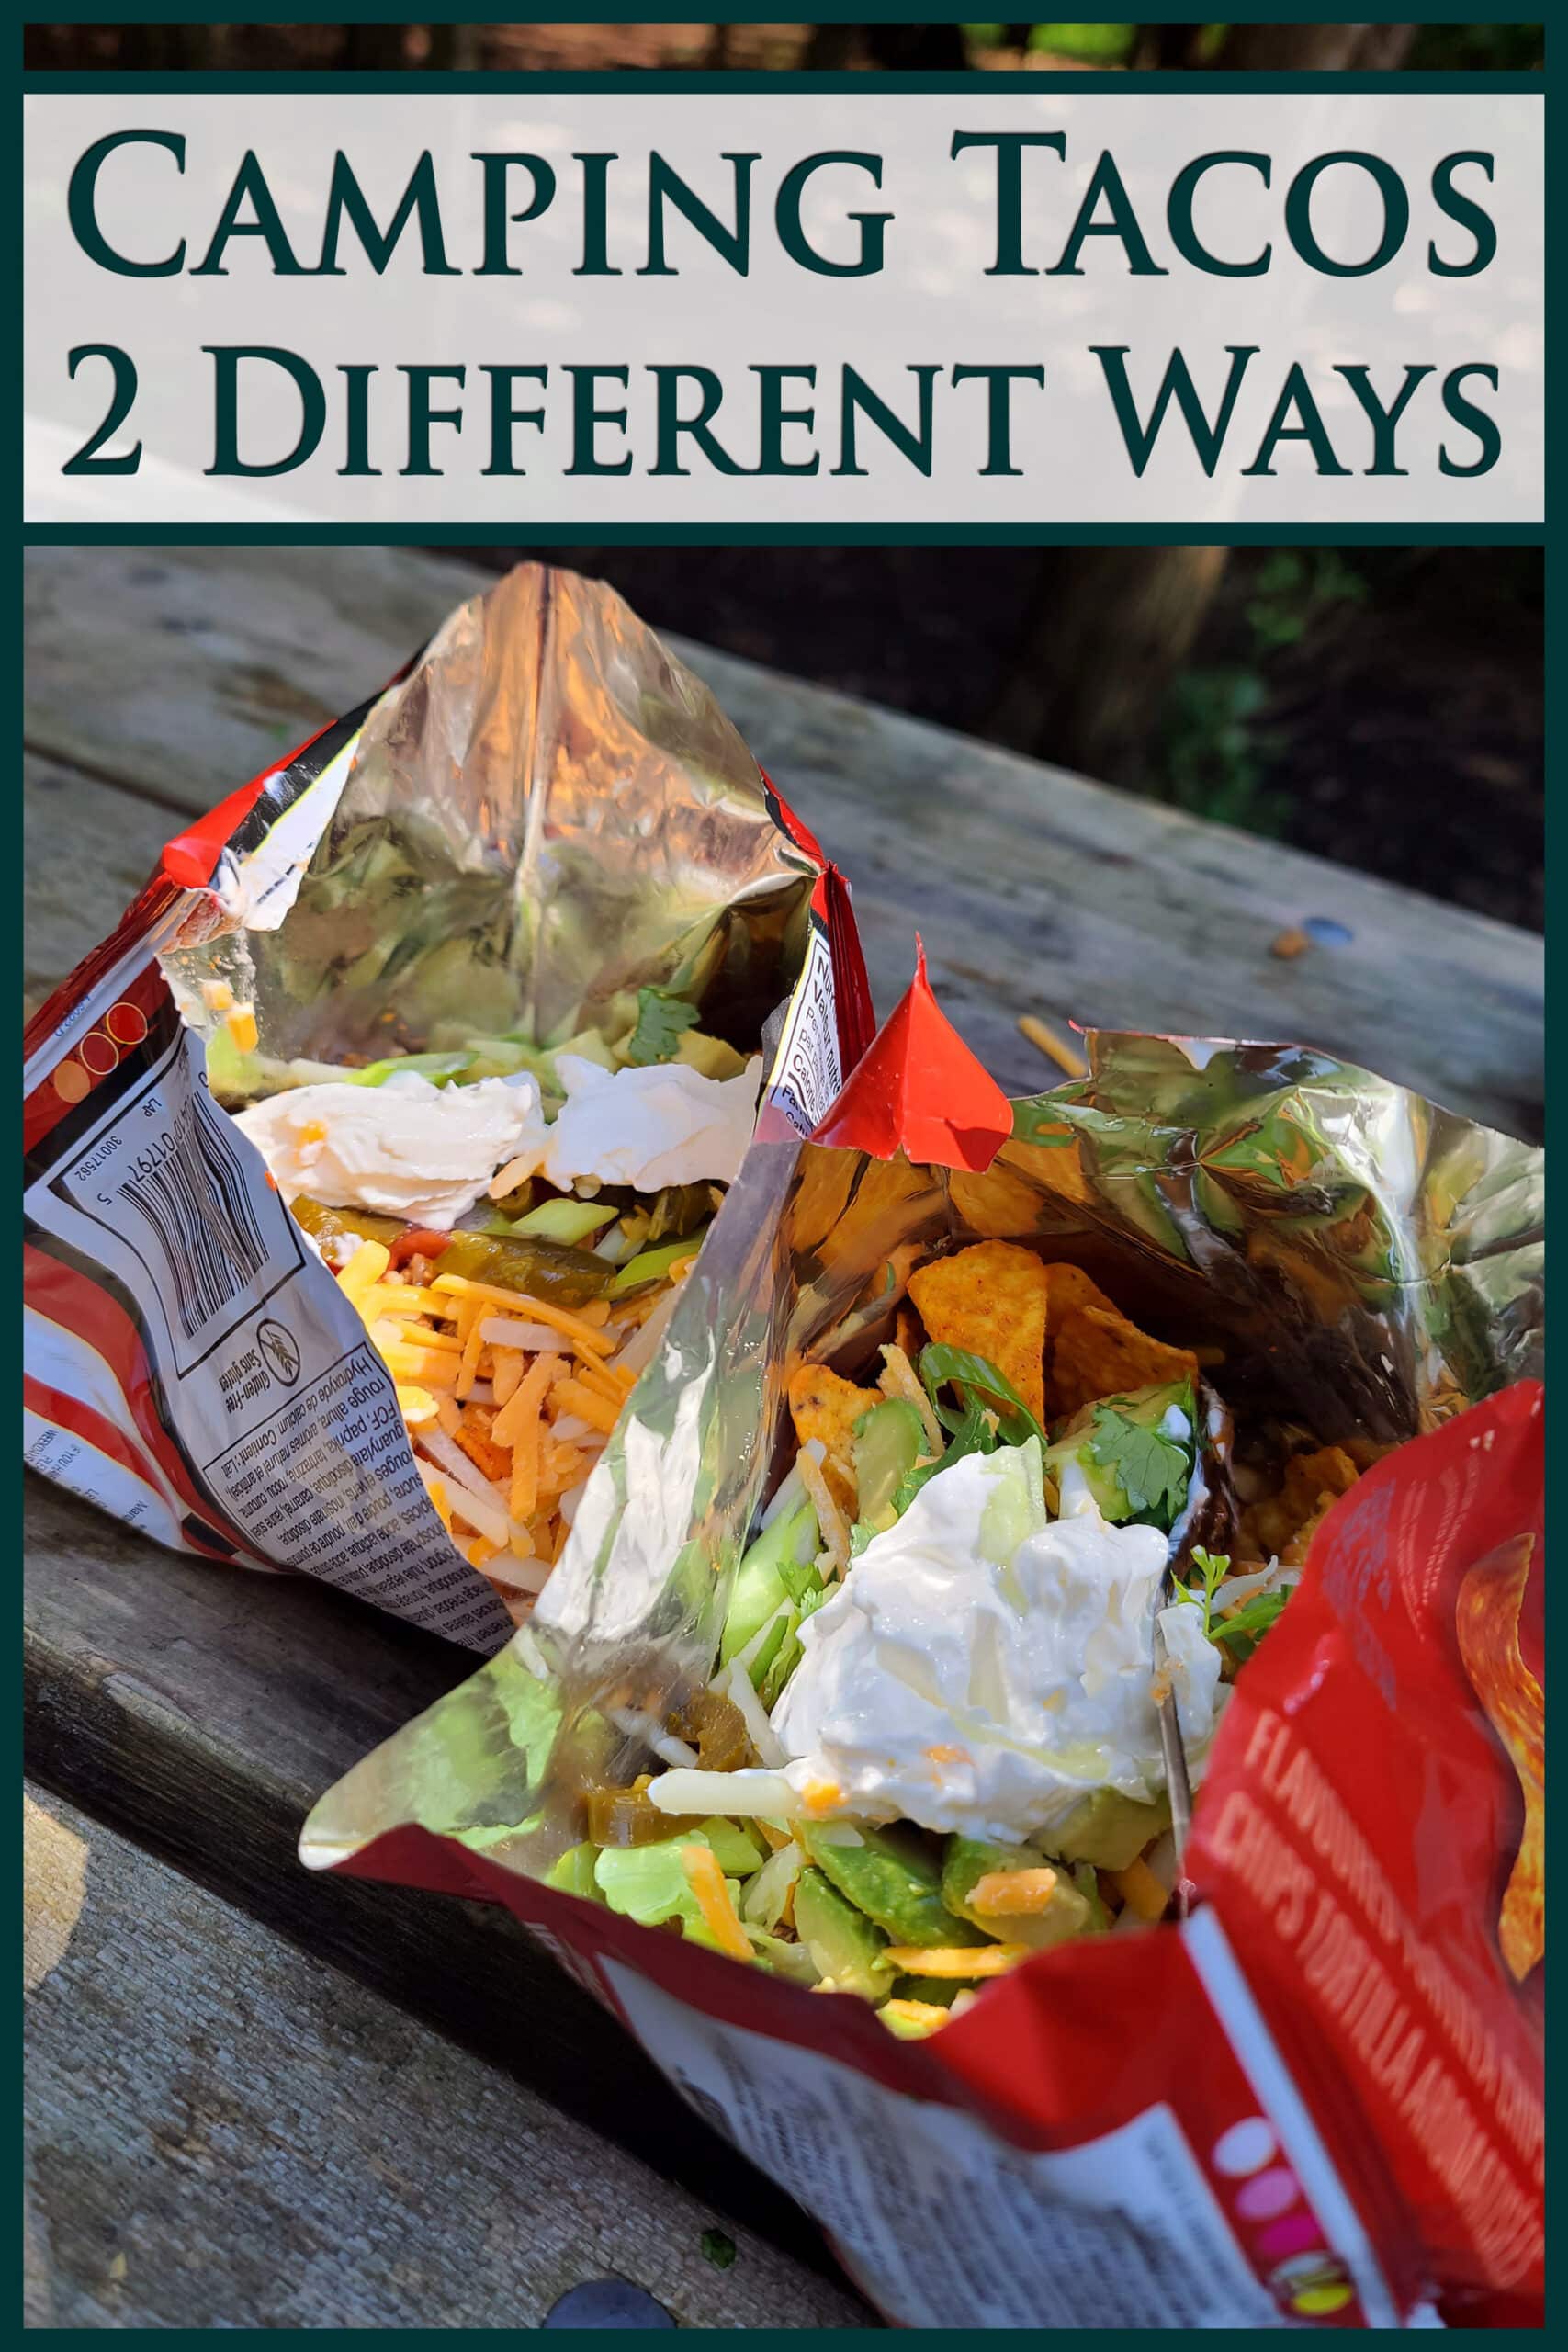 2 bag of camping walking tacos with overlaid text that says camping tacos 2 different ways.